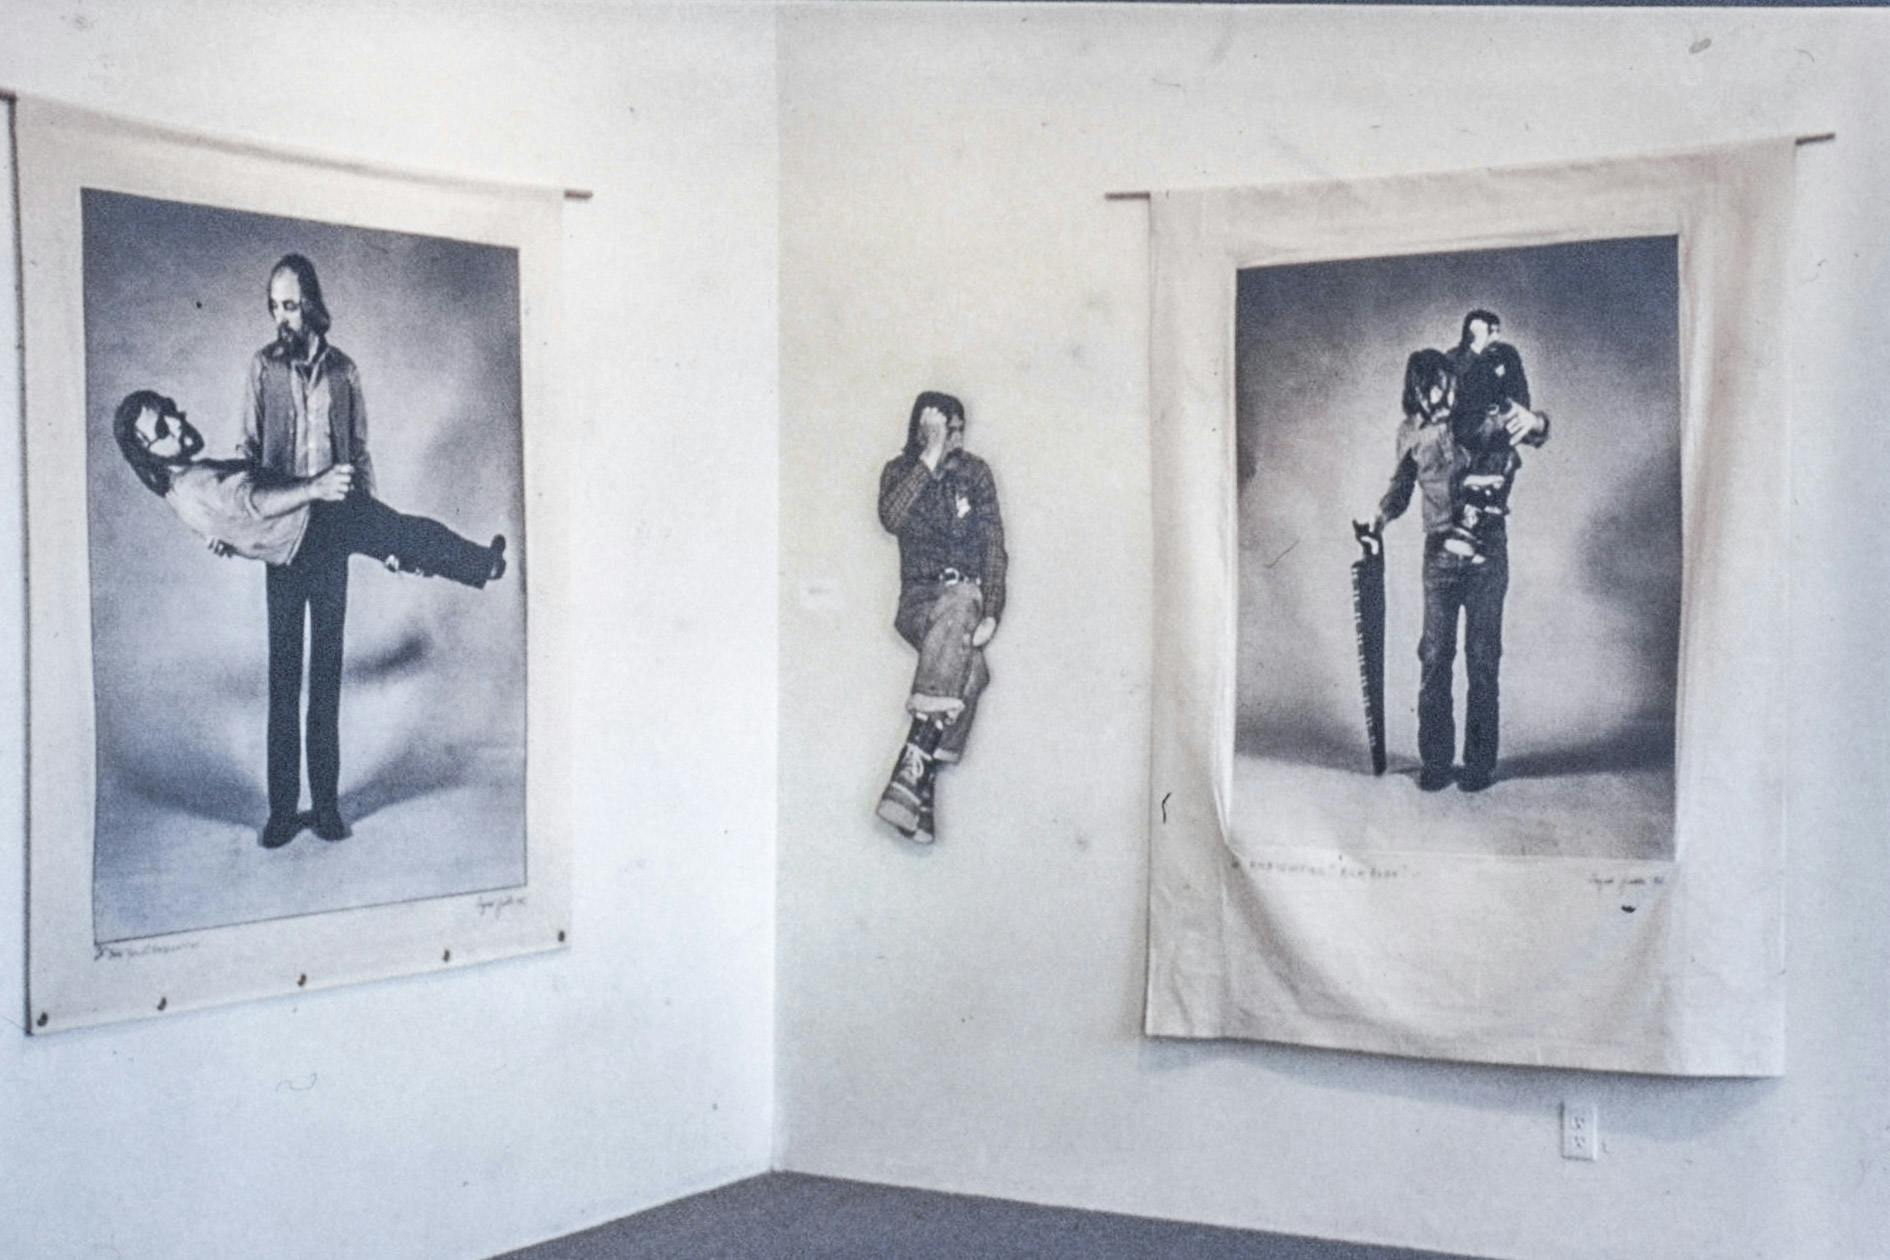 In the corner of a gallery, there are two large photos printed on favribm and a small cardboard cutout mounted on the walls. The photos each show a person with a cardboard cutout of themselves. 